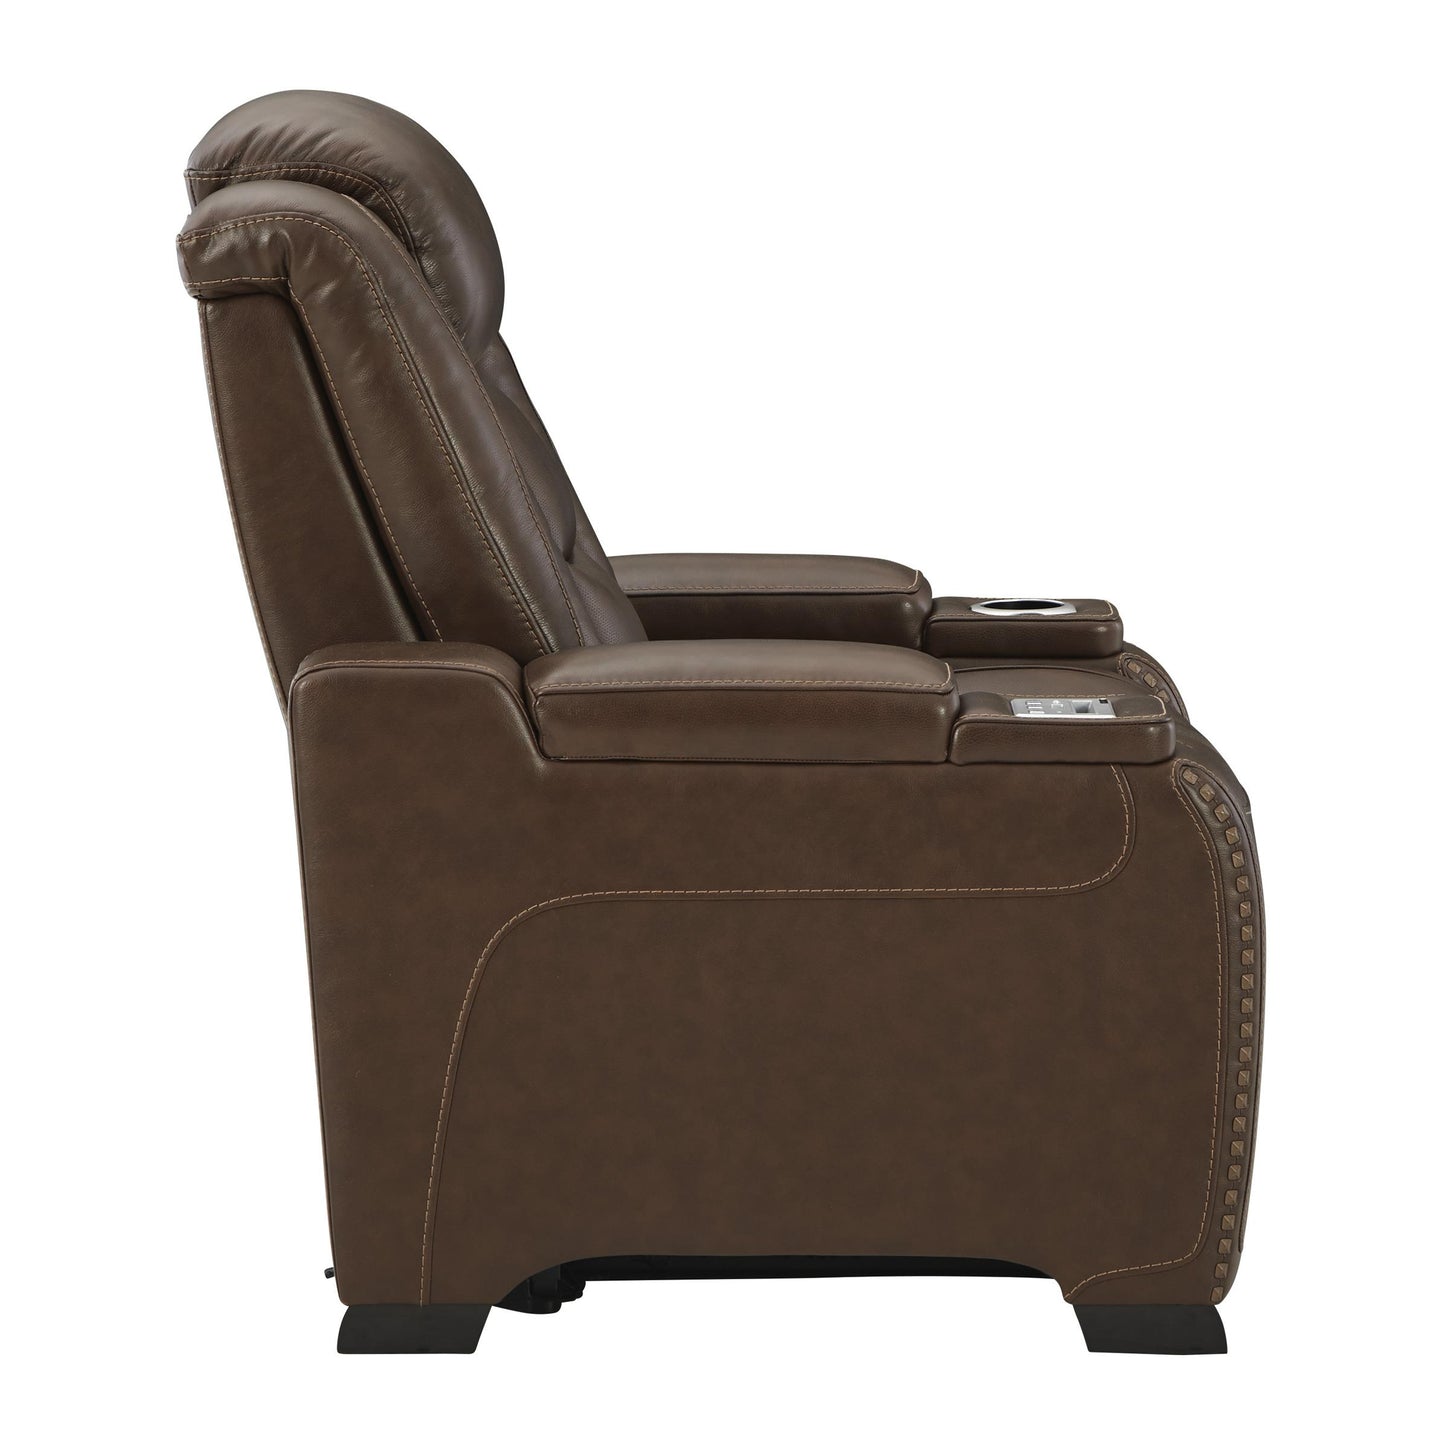 Signature Design by Ashley The Man-Den Power Leather Match Recliner U8530613 IMAGE 3